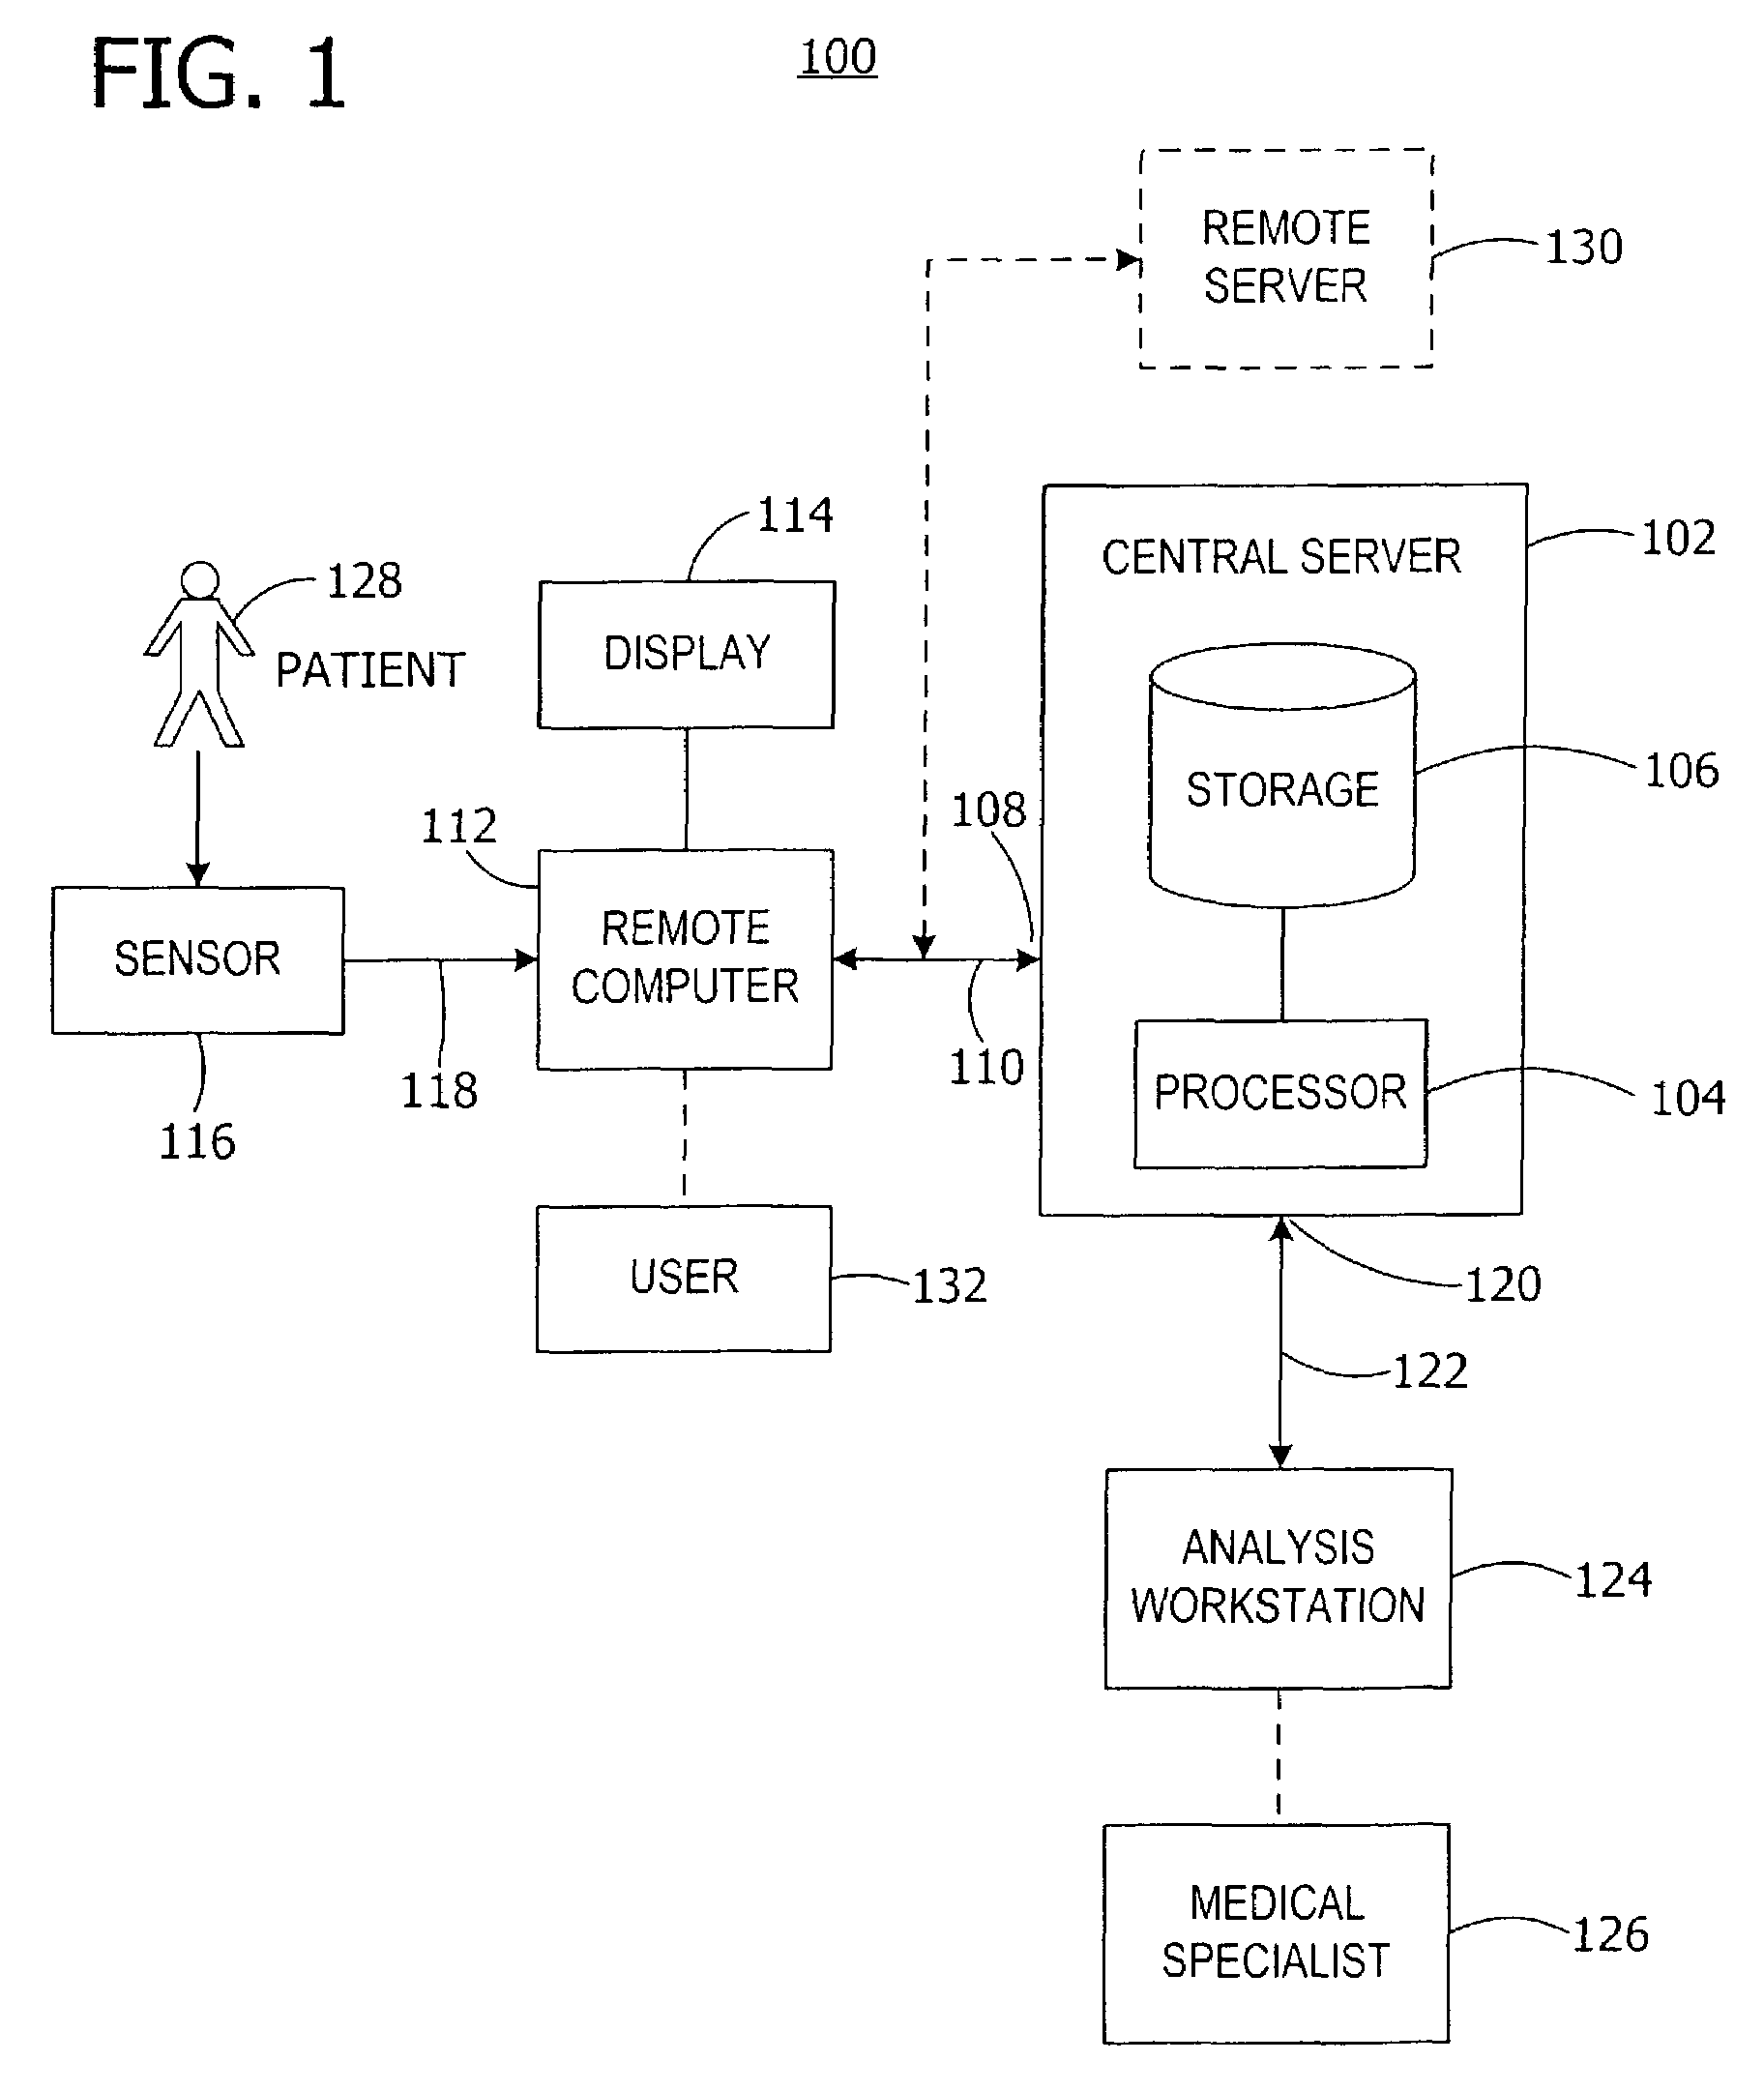 System and method for handling the acquisition and analysis of medical data over a network